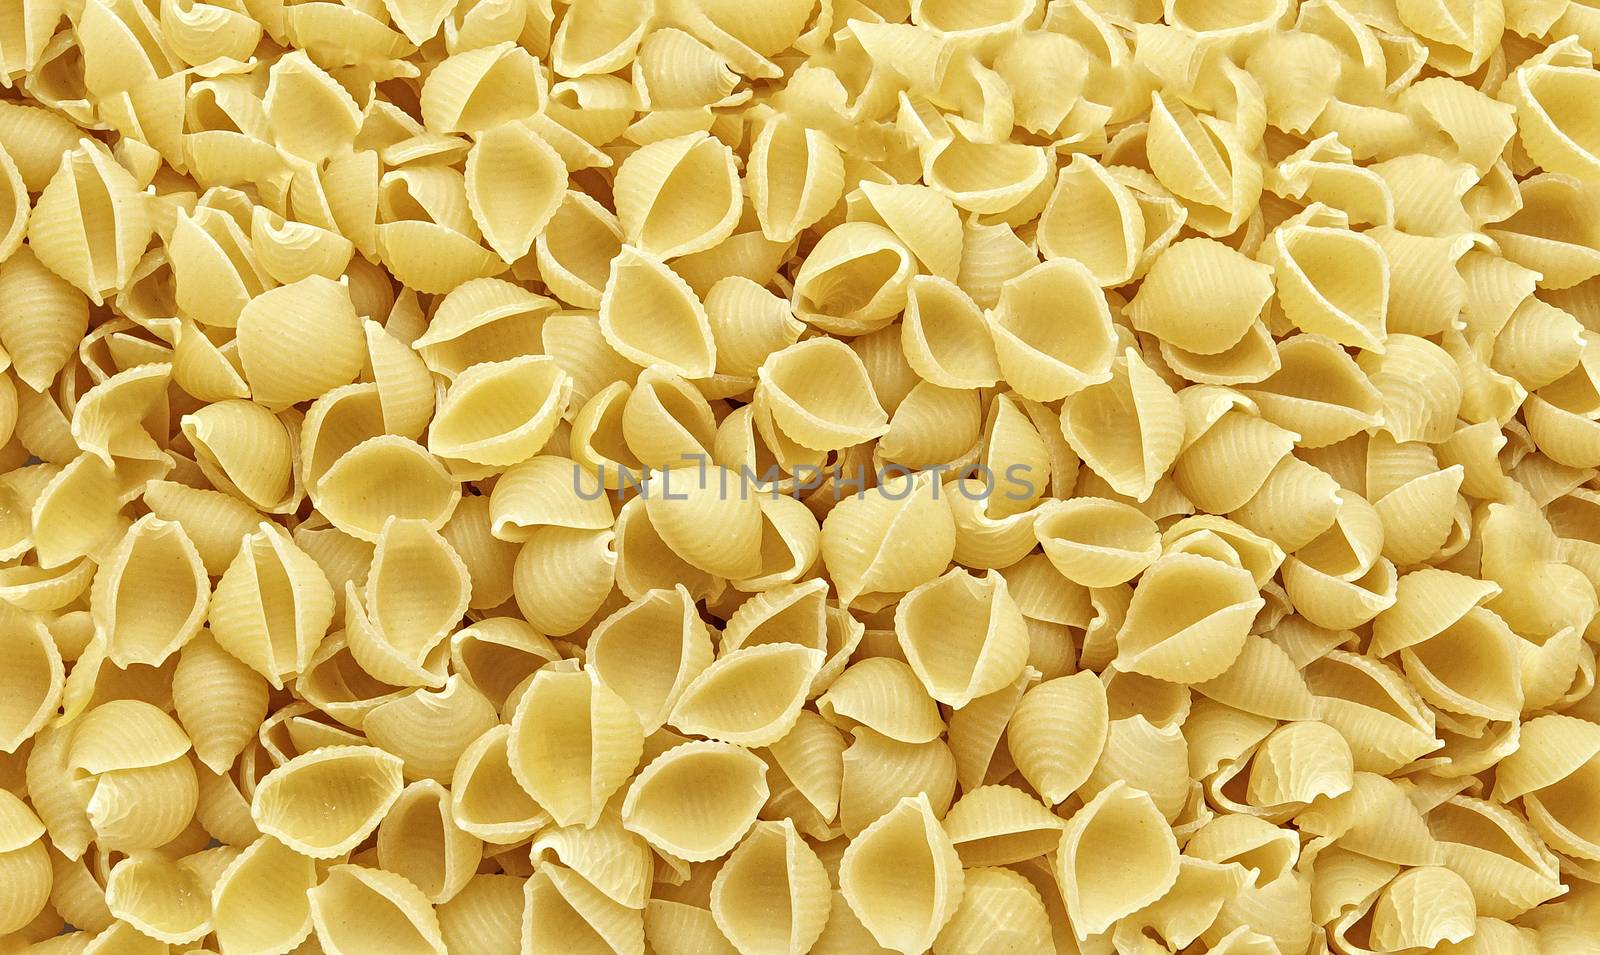 Pasta shells with additional texture and details by Studia72